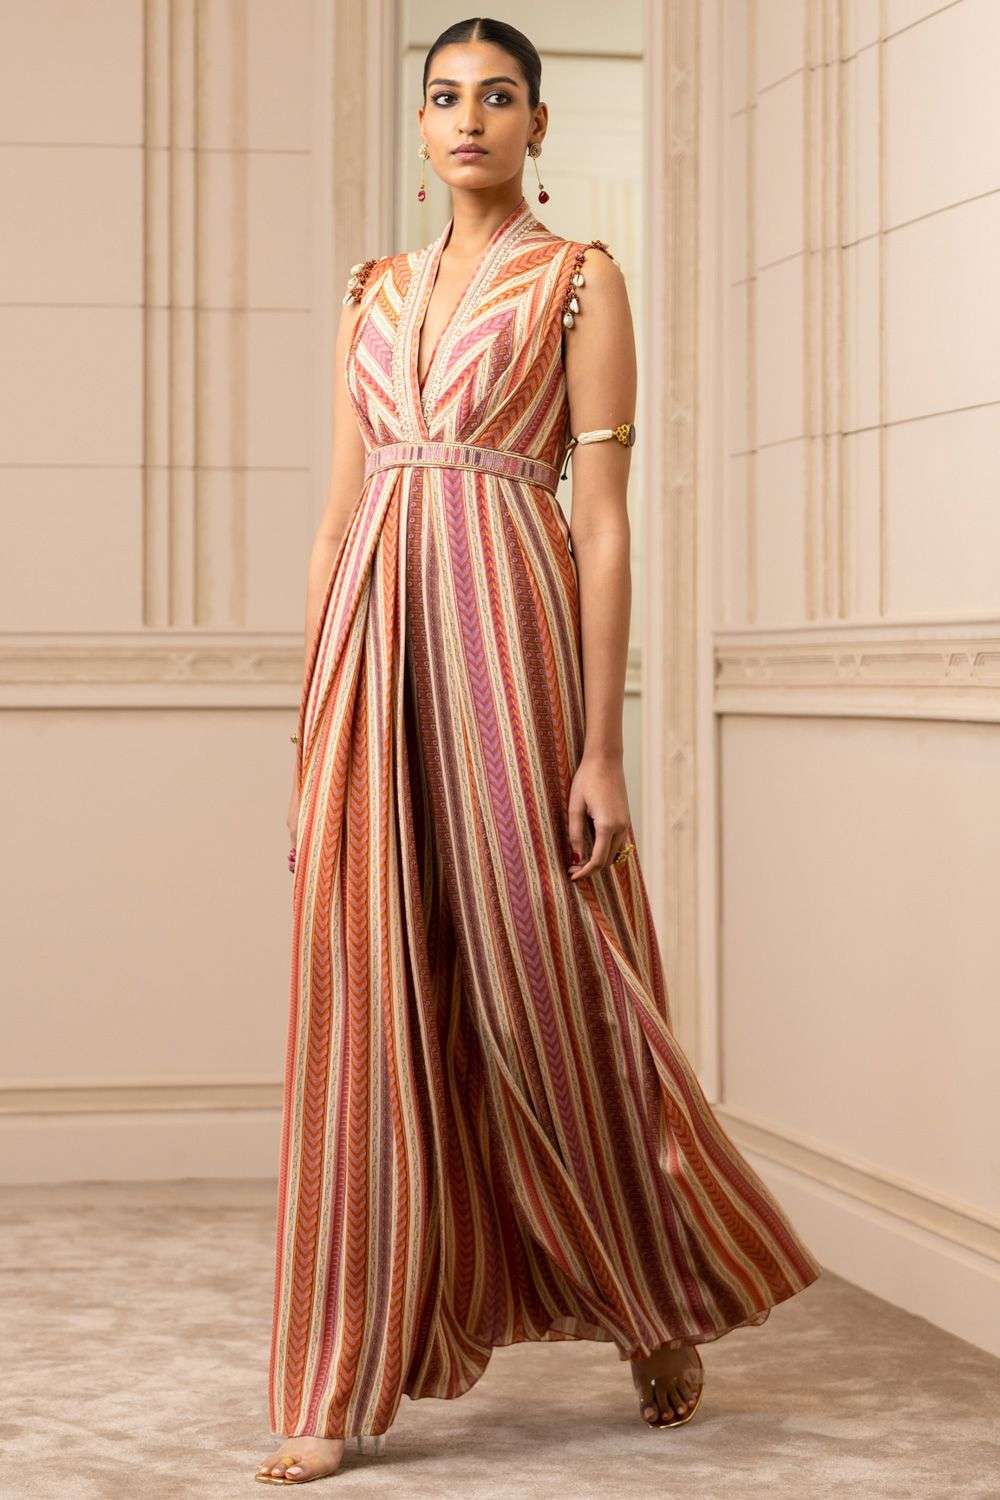 Peach Pink Arabic Prom Jumpsuit Dress With Feather Lace Ribbon And Pant  Suit 2021 Robe De Soirée Light Pink Evening Gown From Alegant_lady, $125.72  | DHgate.Com